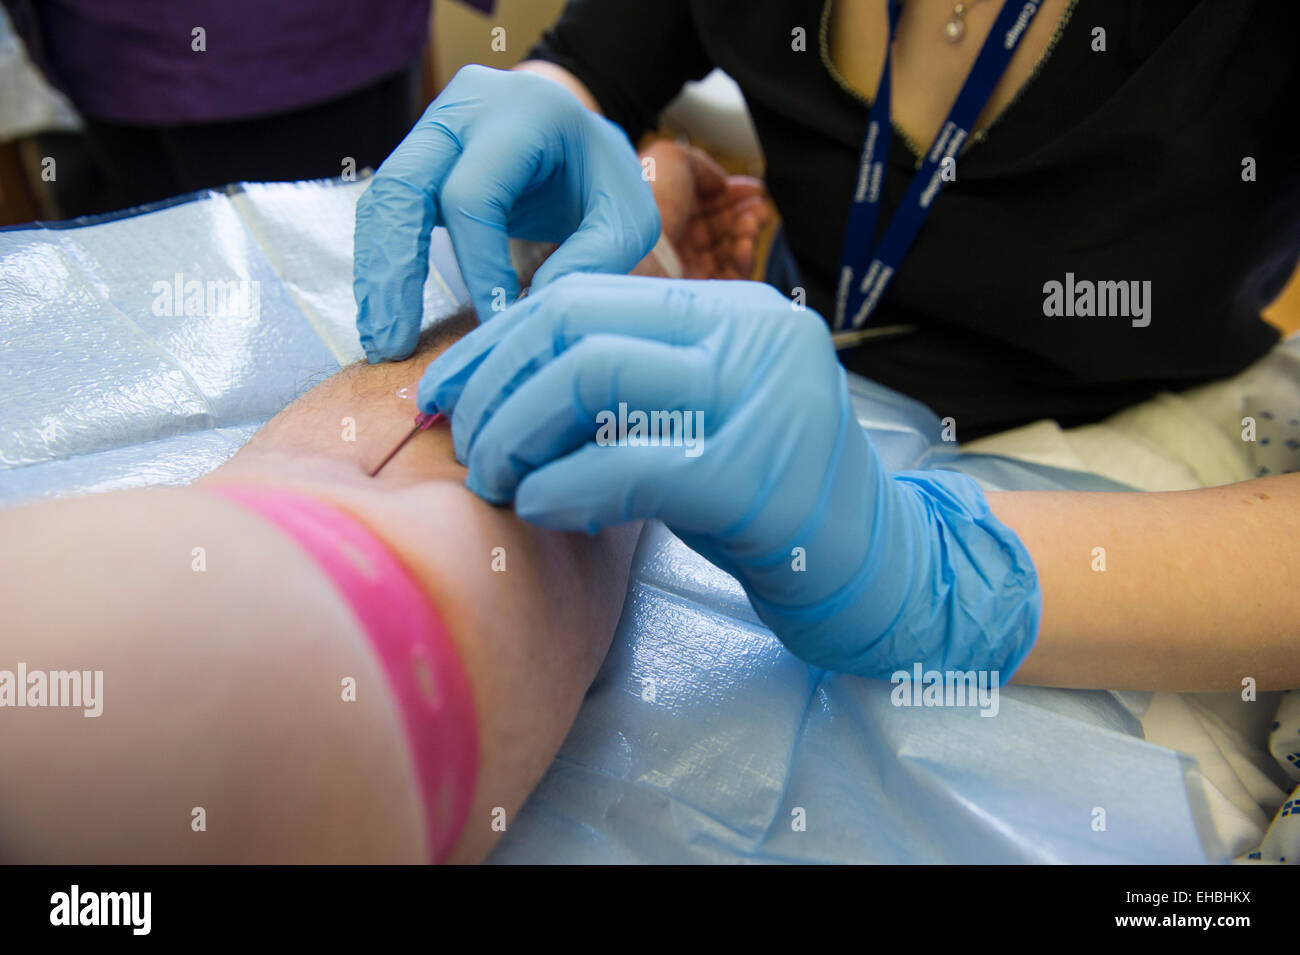 A man has a blood test in a hospital Stock Photo